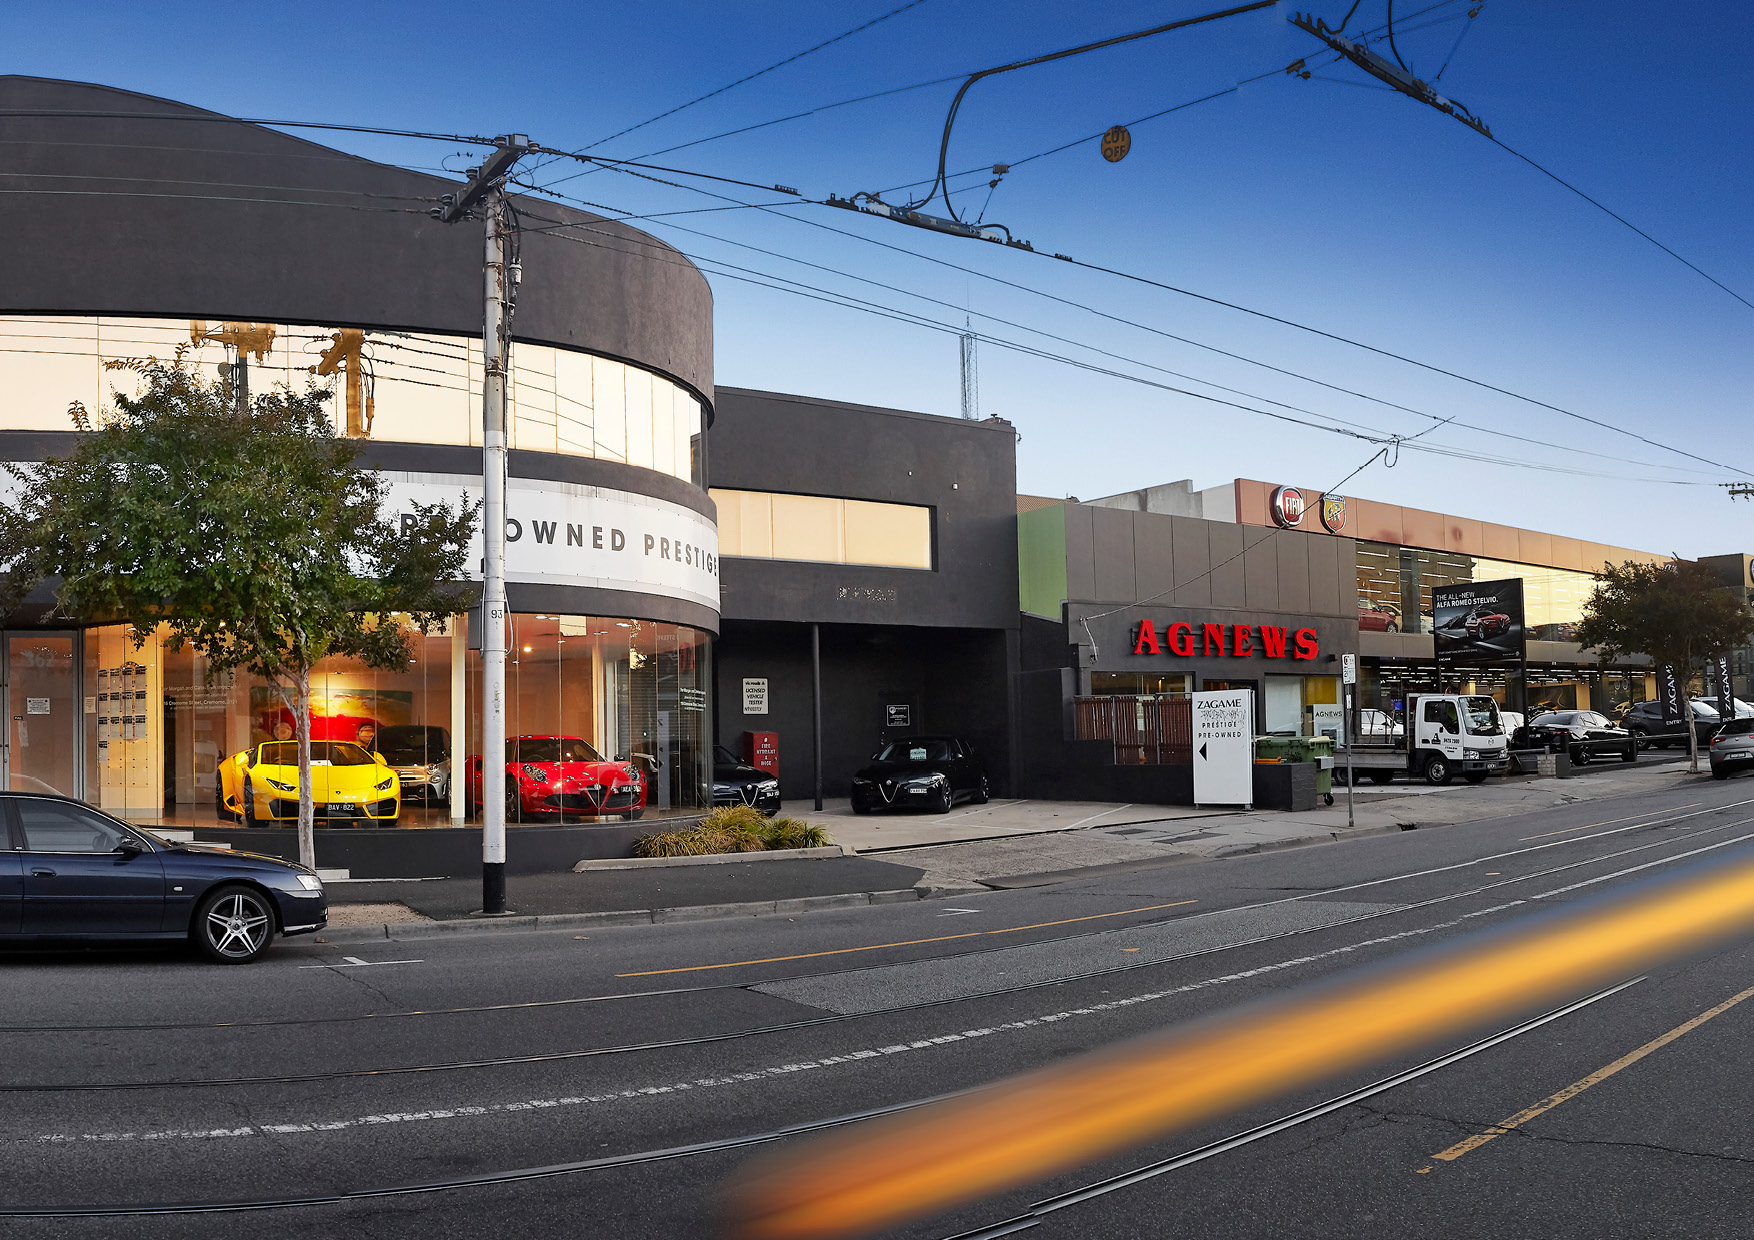 Sold Swan Street Collection Pt 1 Richmond 362 Swan Street Development Commercial Real Estate